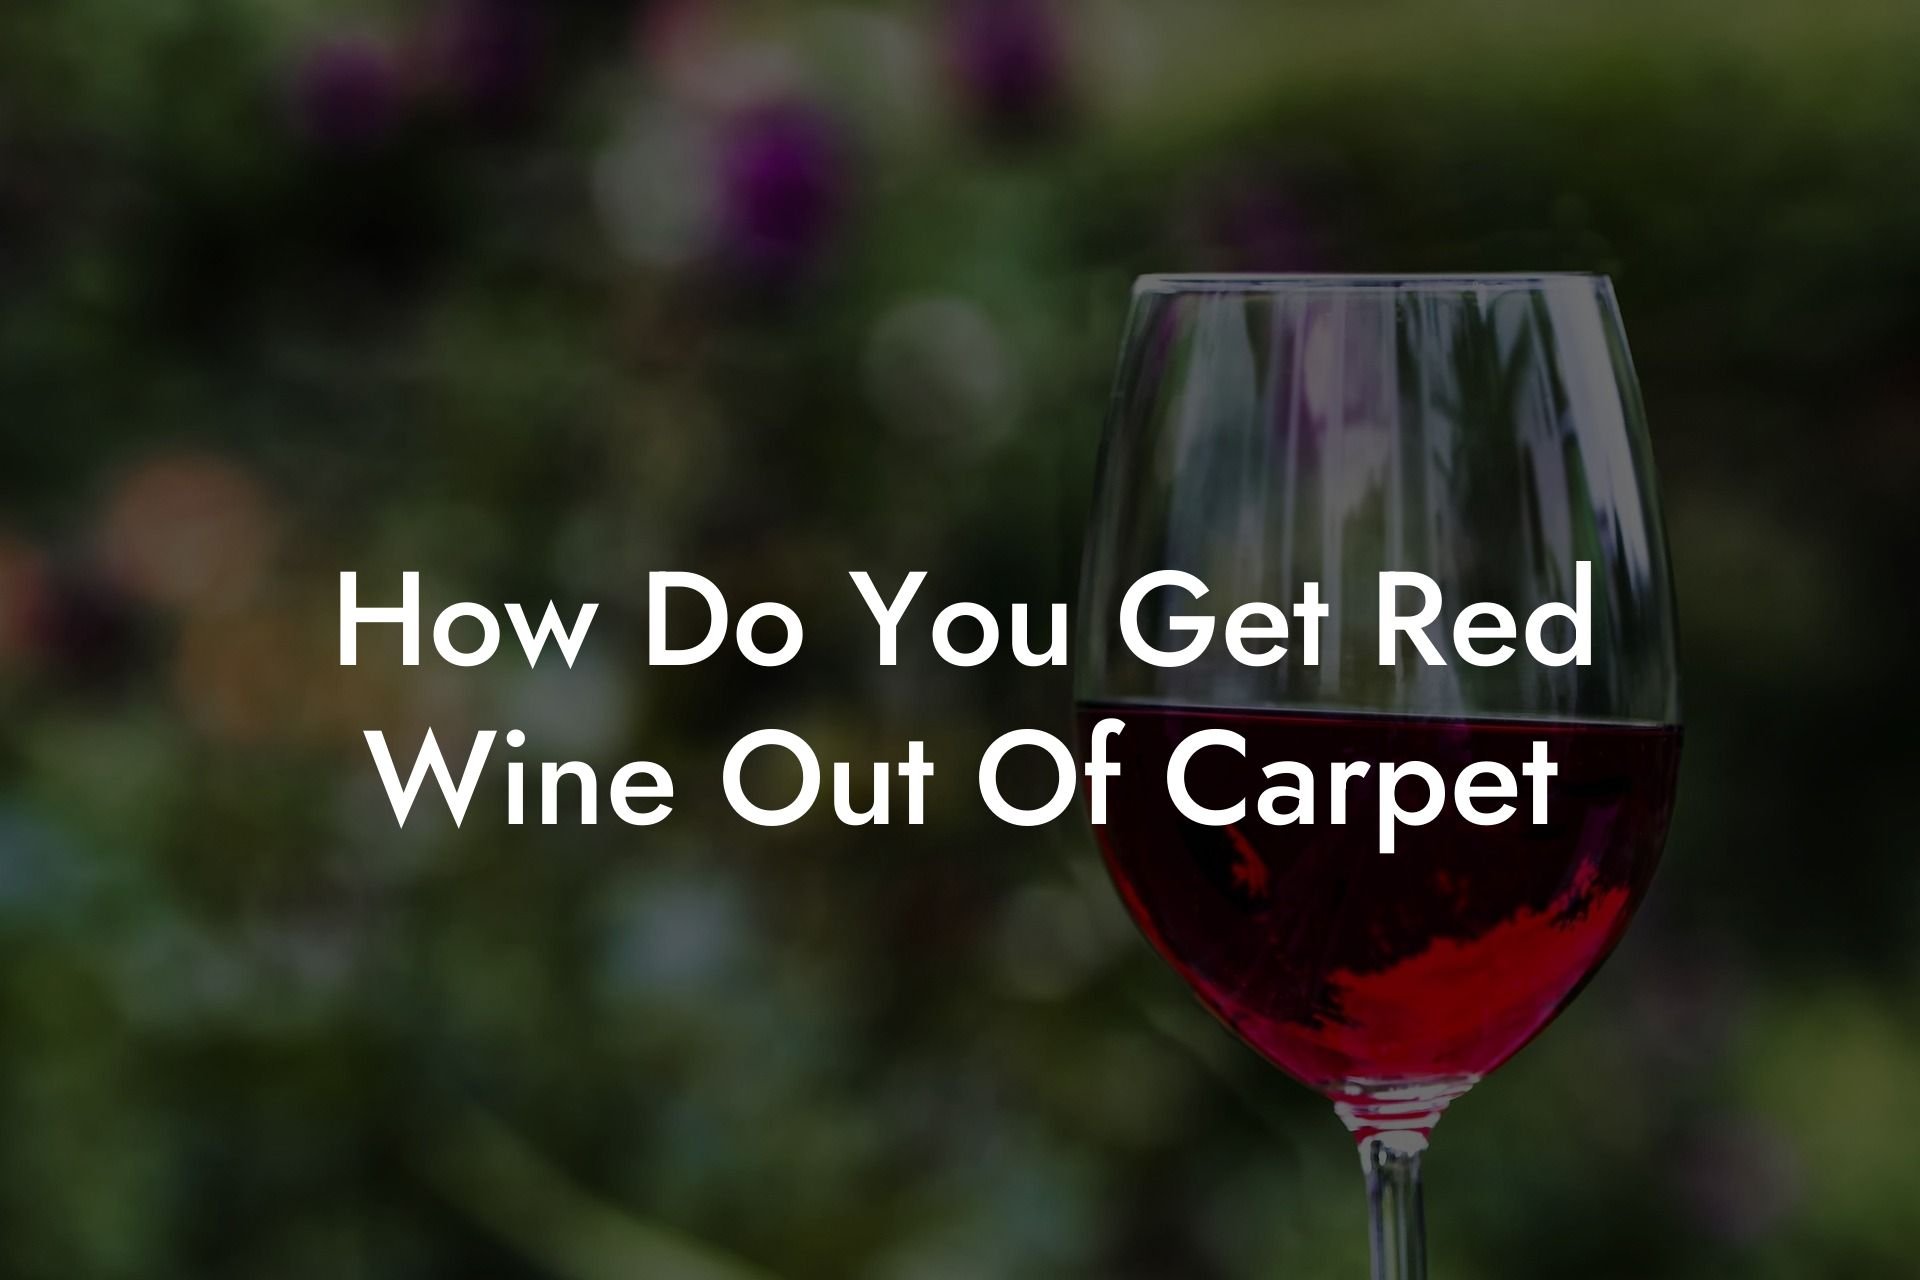 How Do You Get Red Wine Out Of Carpet